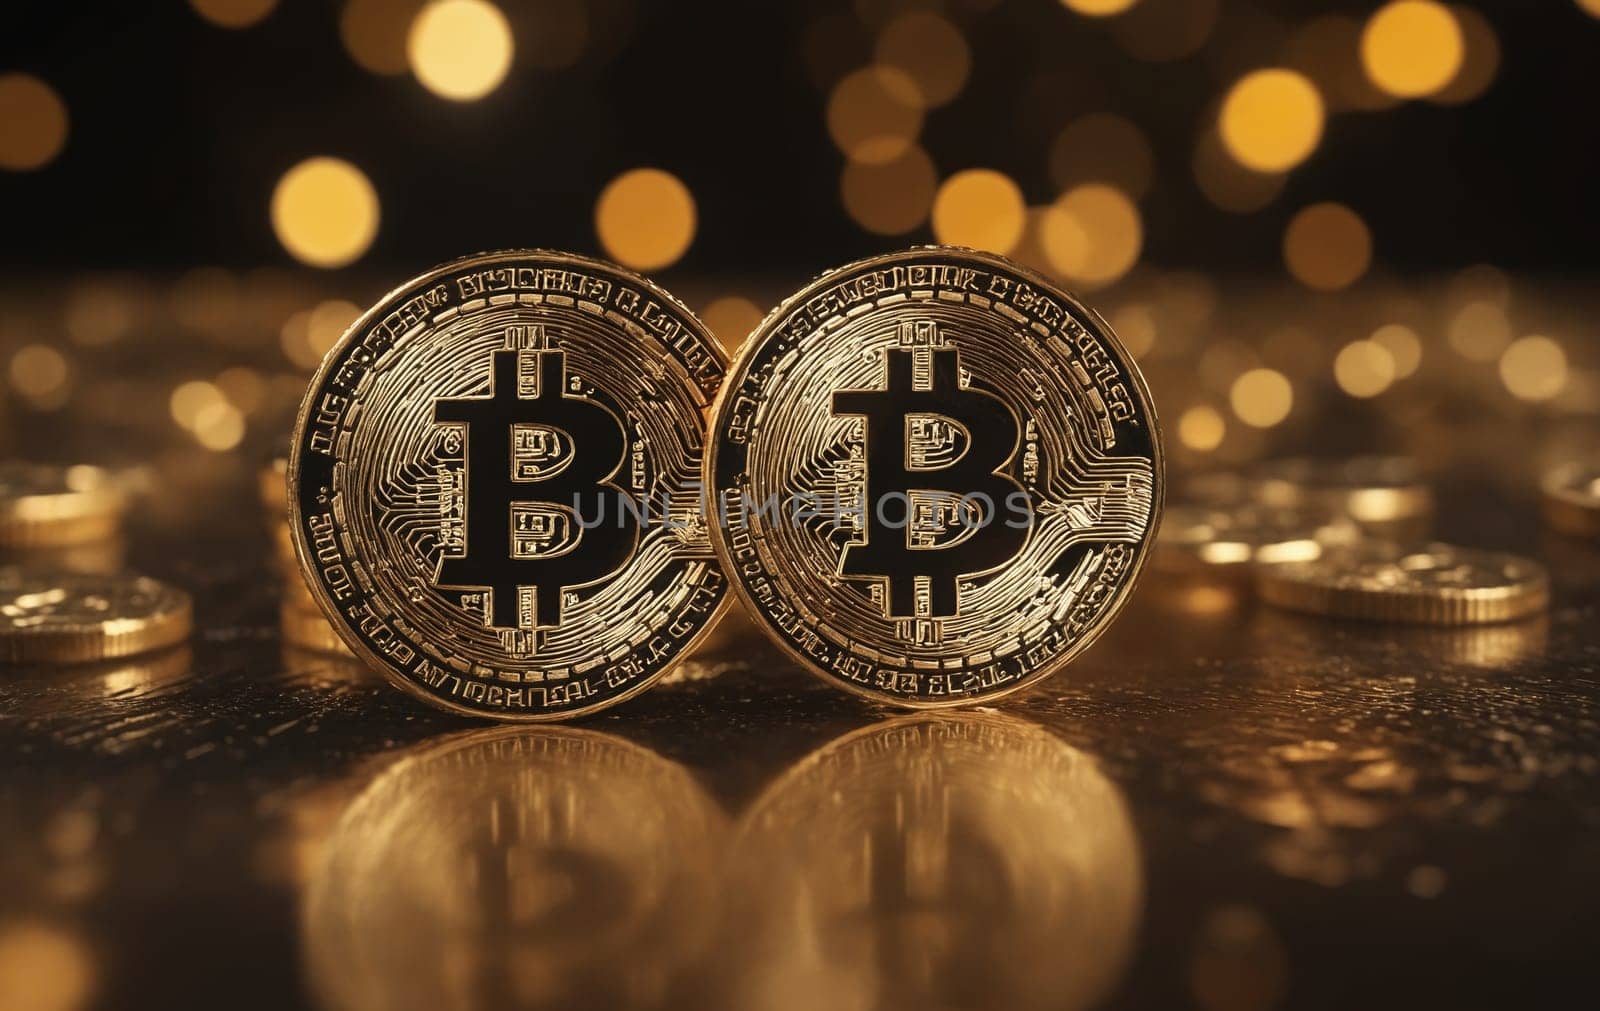 Three bitcoin coins are arranged in a stack on a table, showcasing the digital currency in a closeup, macro photography style